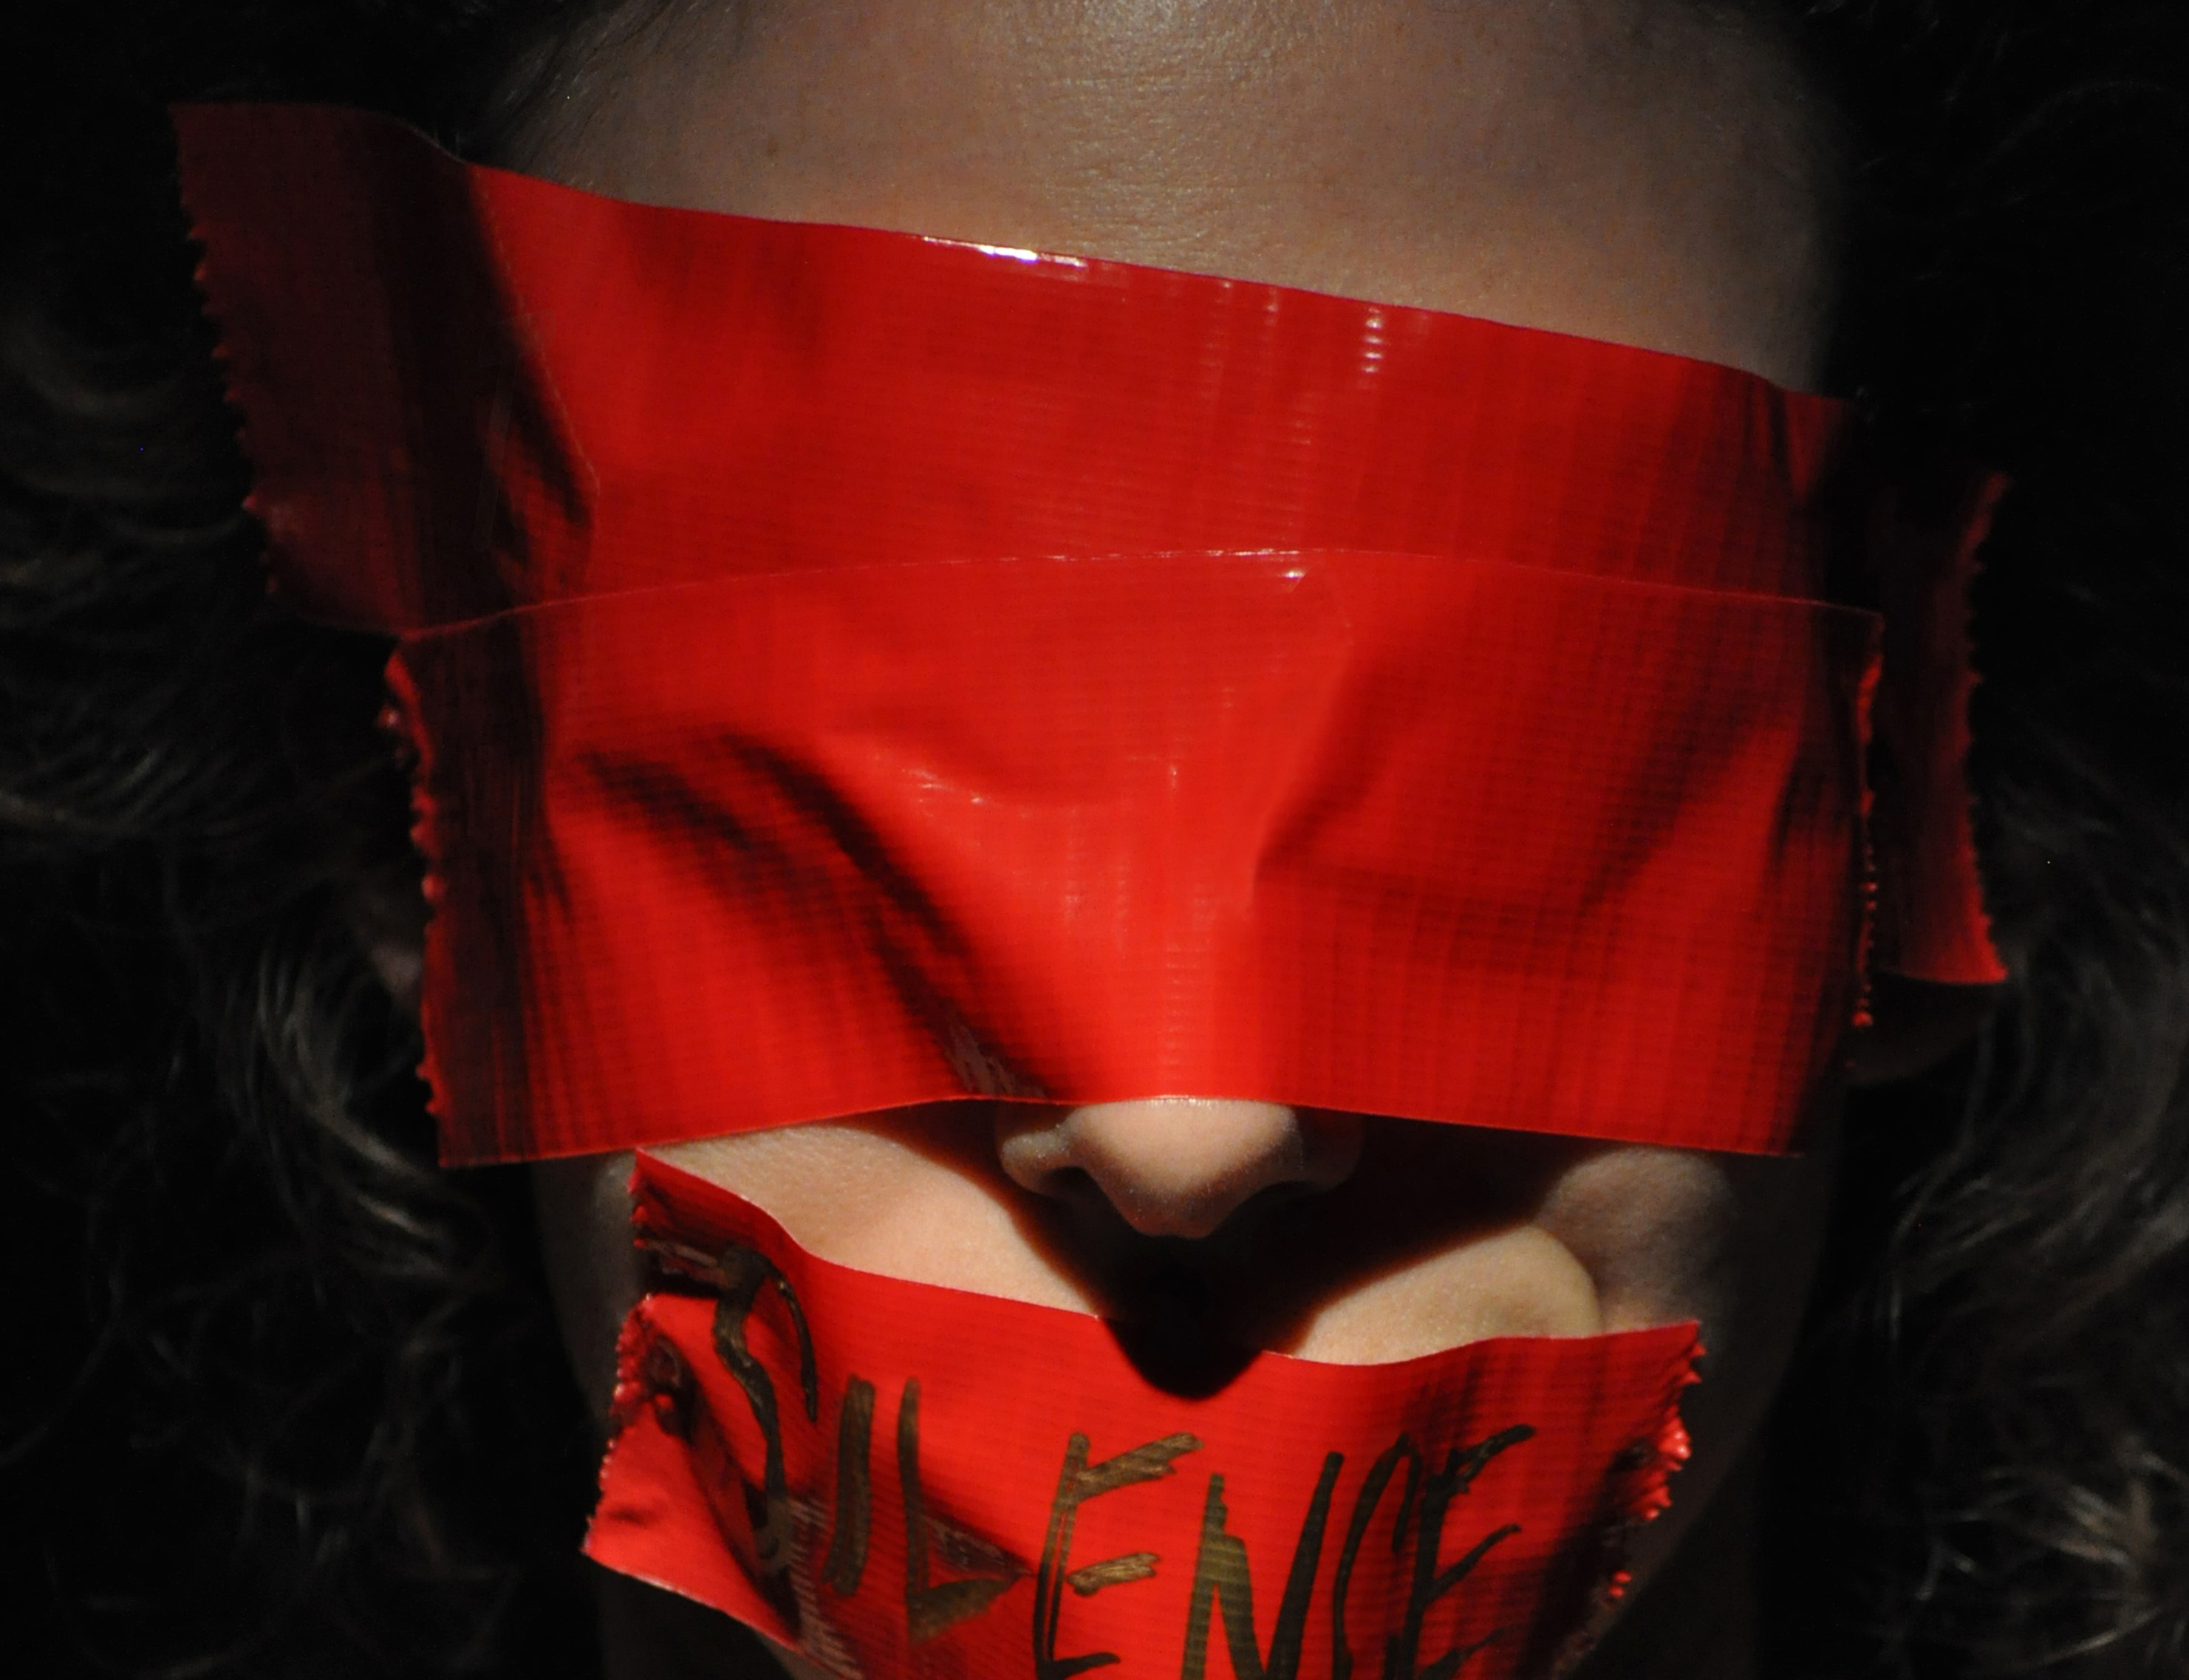 image of a woman silence and blindfolded.